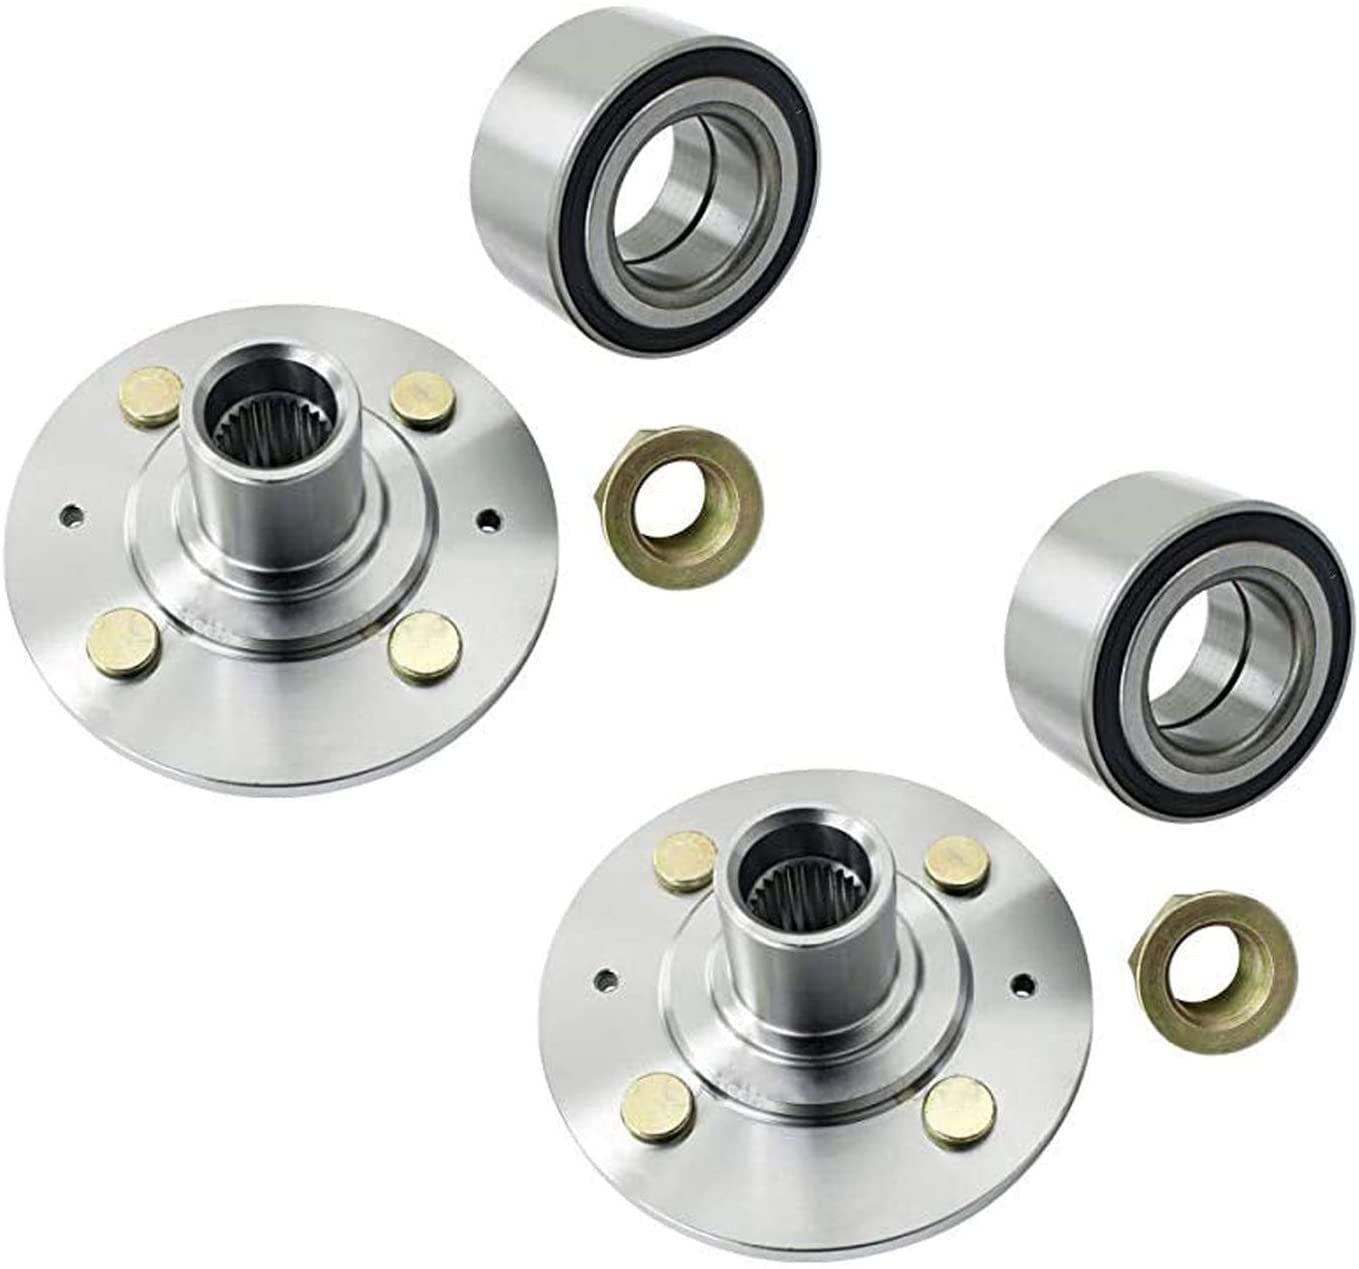 Pair 2 Front Wheel Hub & Bearing Assembly for 1988 1989 Honda Accord - Walmart.com - Walmart.com Honda Accord Front Wheel Bearing And Hub Assembly